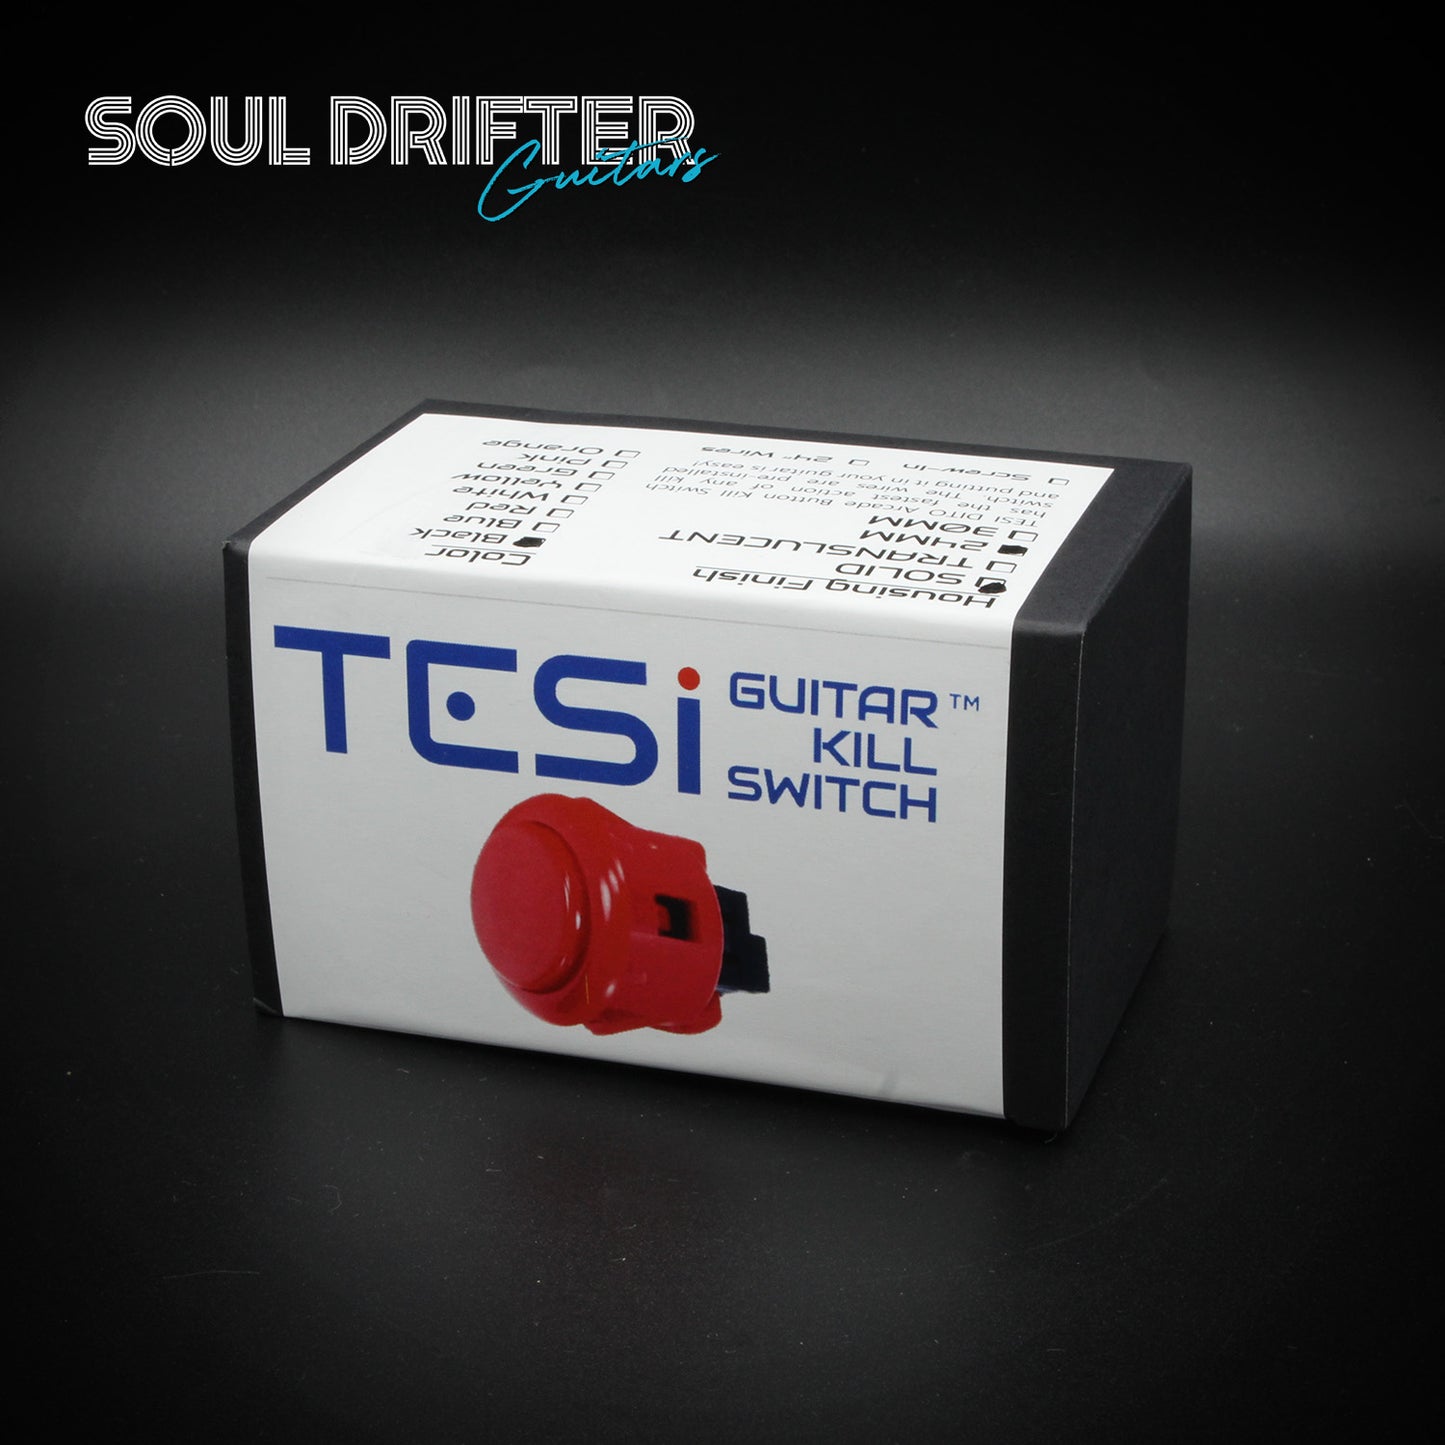 Tesi DITO 24MM Solid Arcade Push Button Guitar Kill Switch - Red